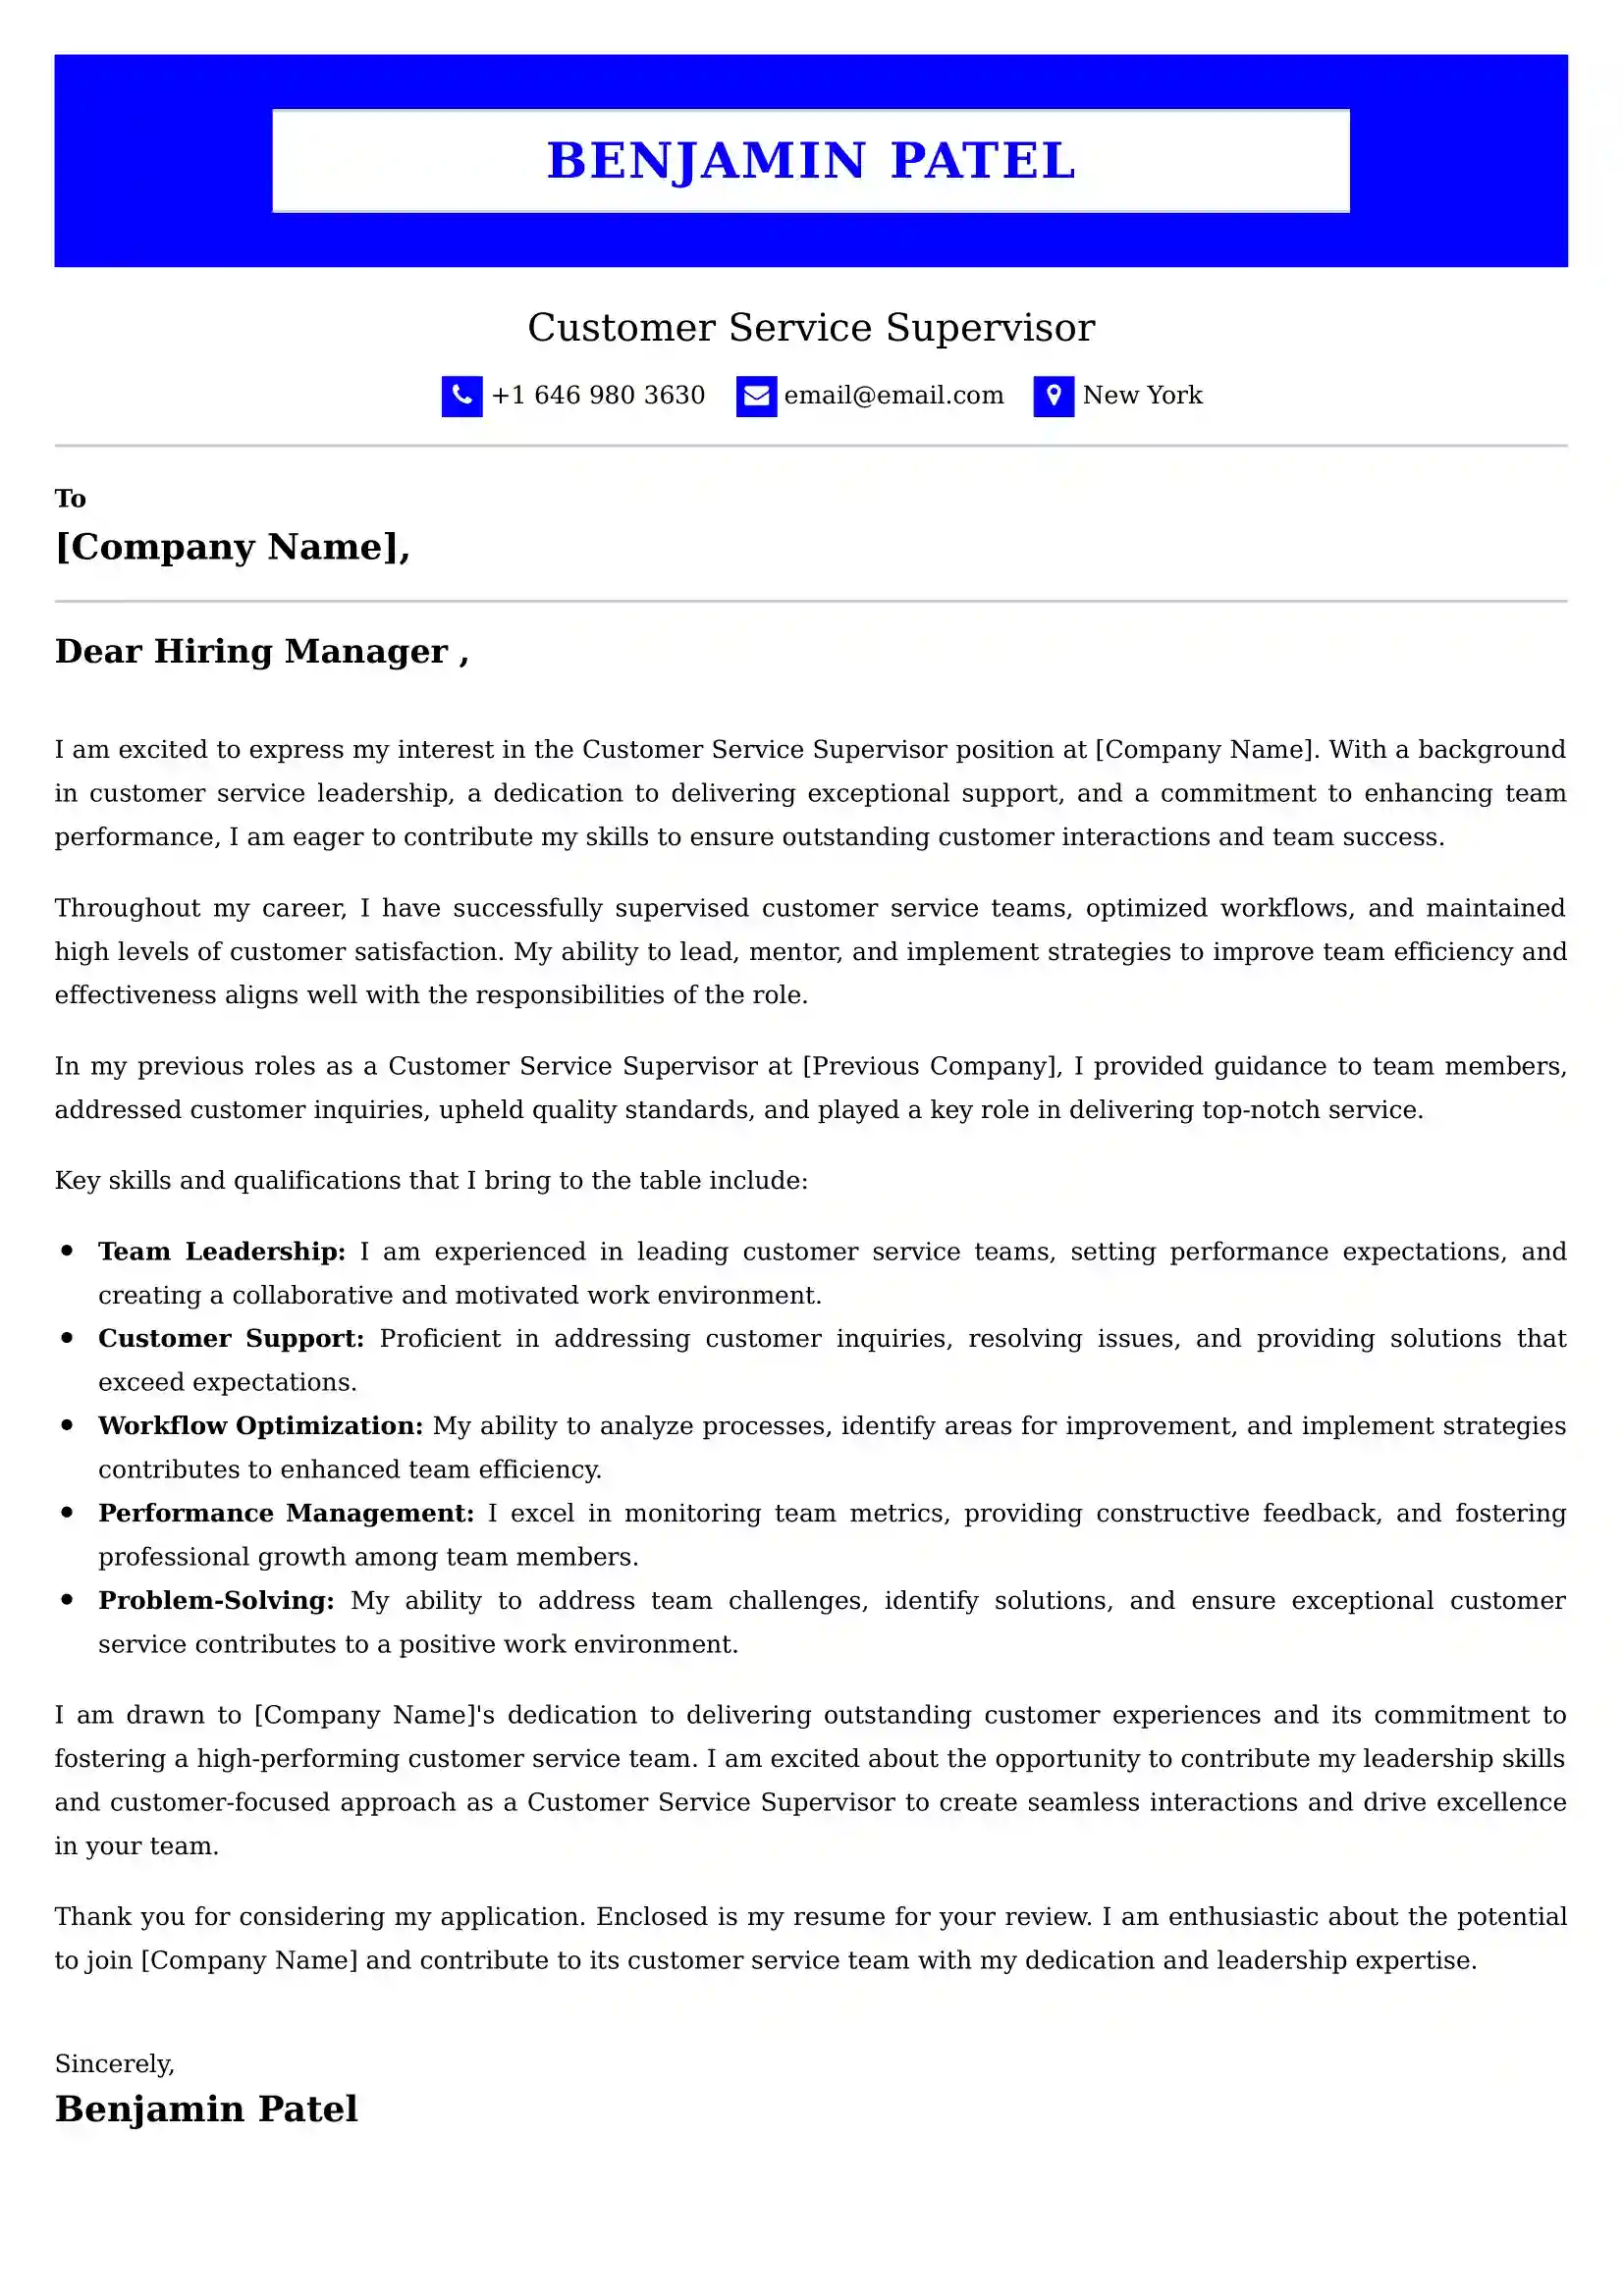 Customer Service Supervisor Cover Letter Examples UK - Tips and Guide